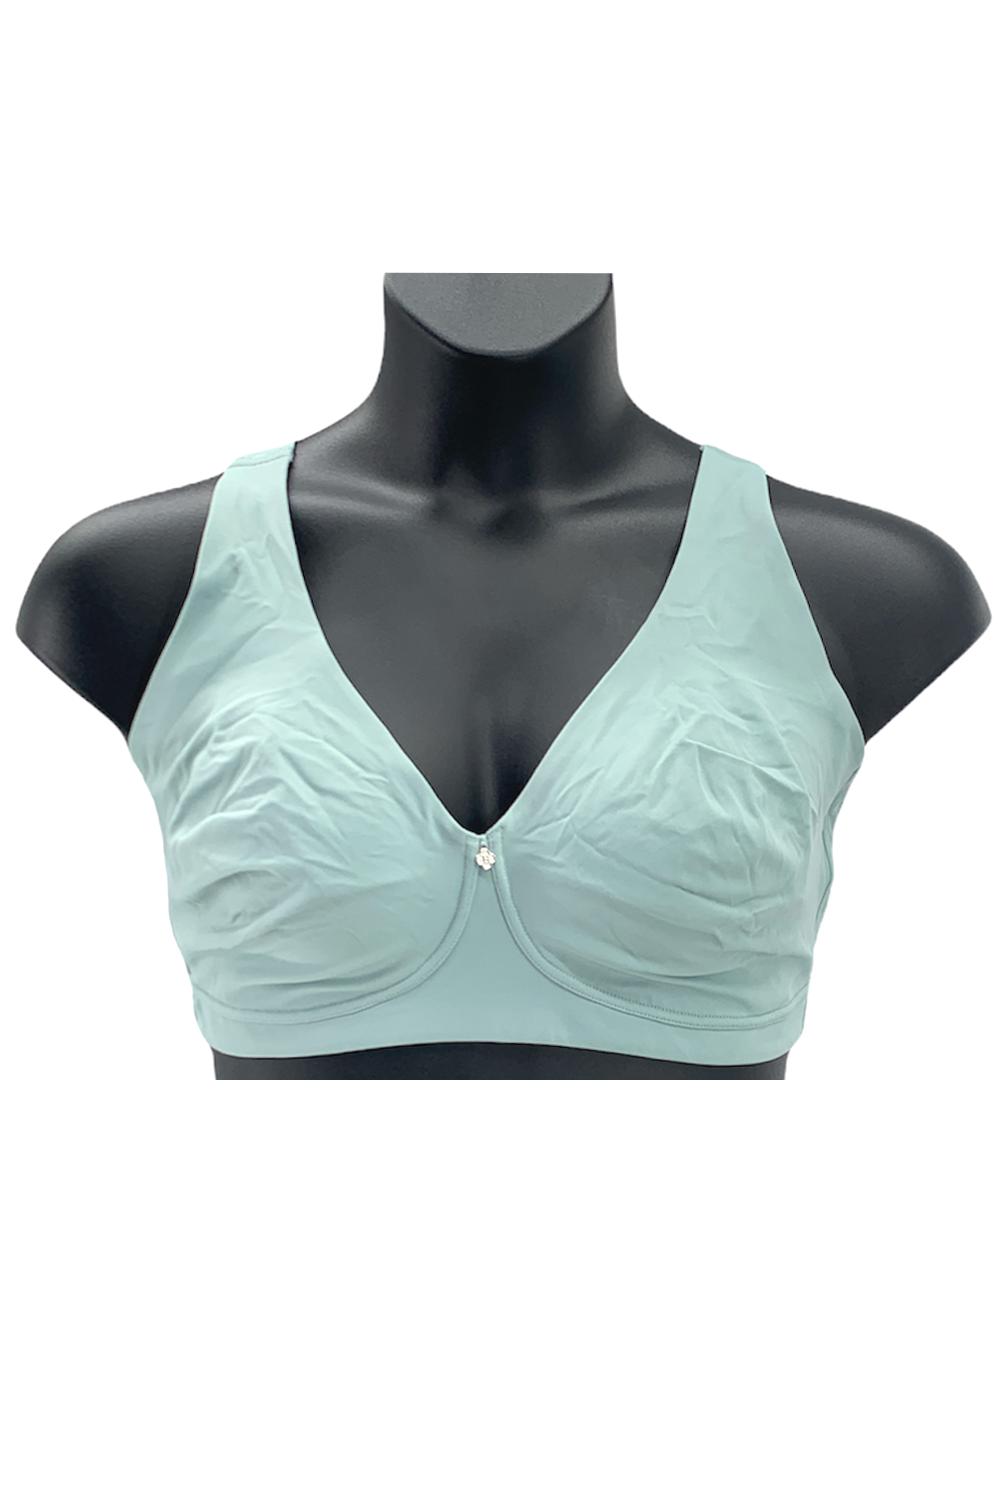 Breezies Modern Micro Unlined Wirefree Support Bra Soft Jade